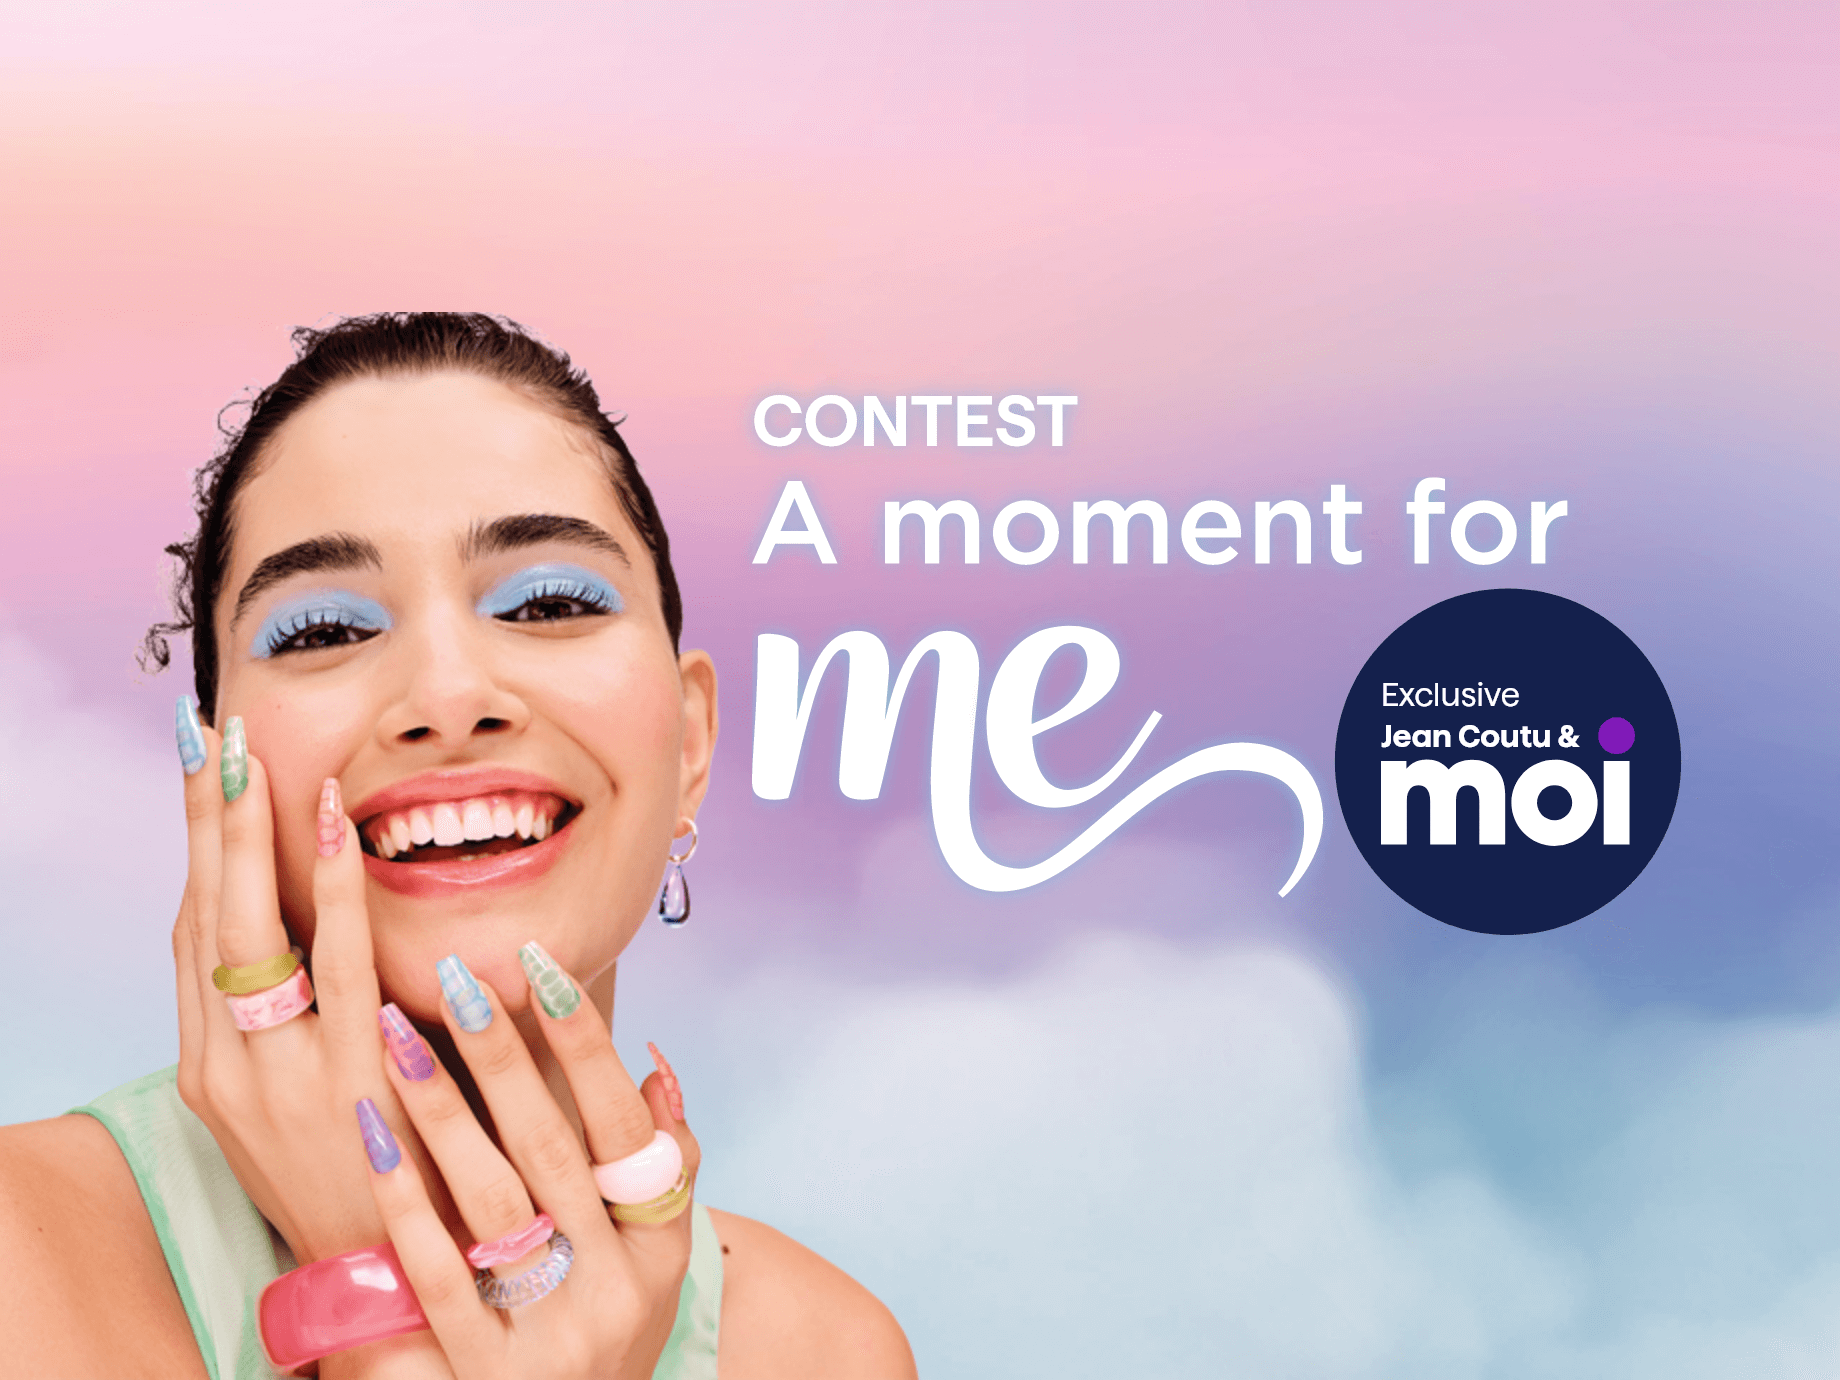 Contest a moment for me. Exclusive Jean Coutu & moi